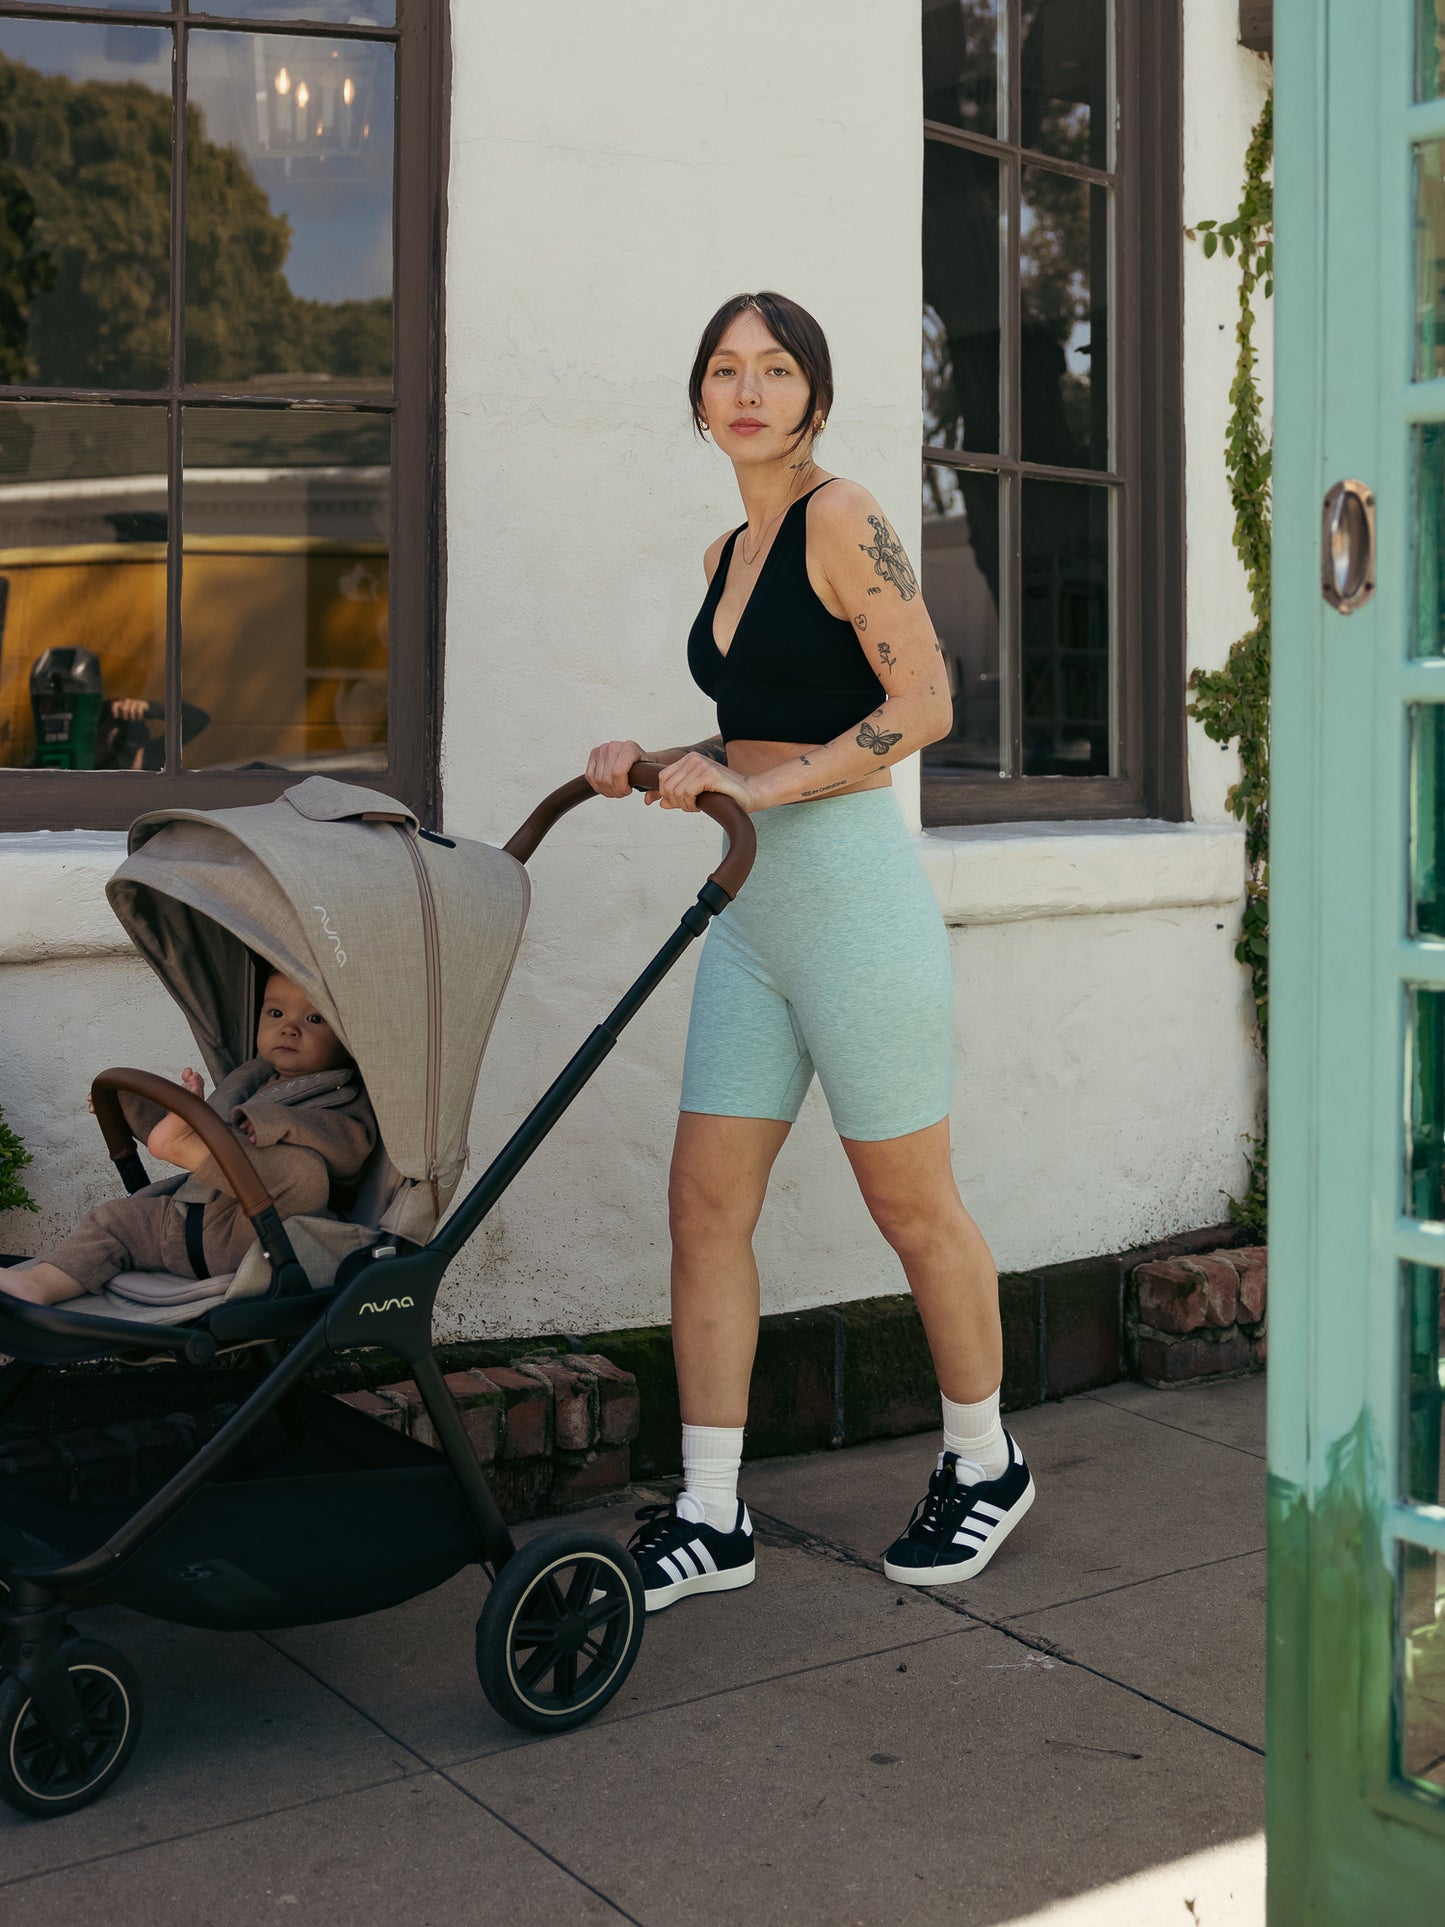 Model wearing the Sublime Maternity & Nursing Plunge Bra in Black paired with the Sublime Bamboo Bike Shorts in Dusty Blue Green. She is pushing her baby in a stroller.